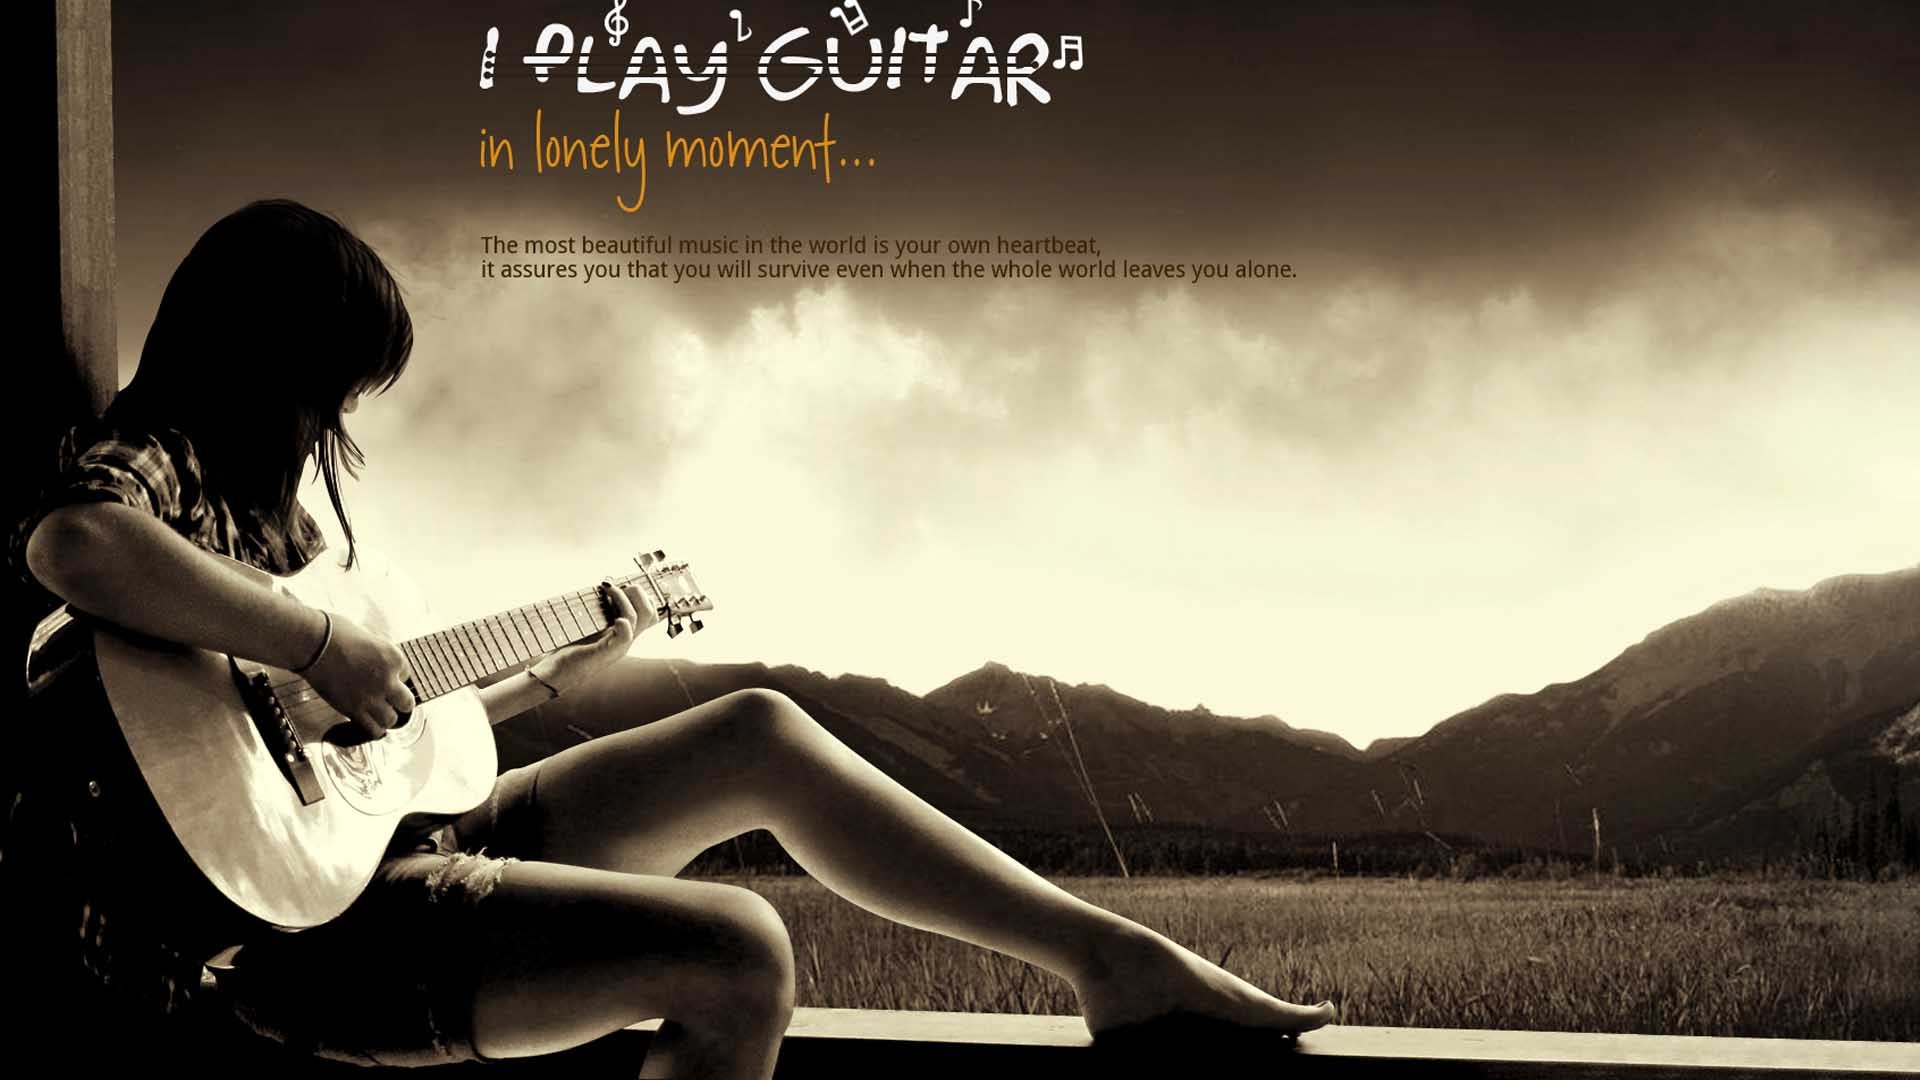 Caption For Dp With Guitar - HD Wallpaper 